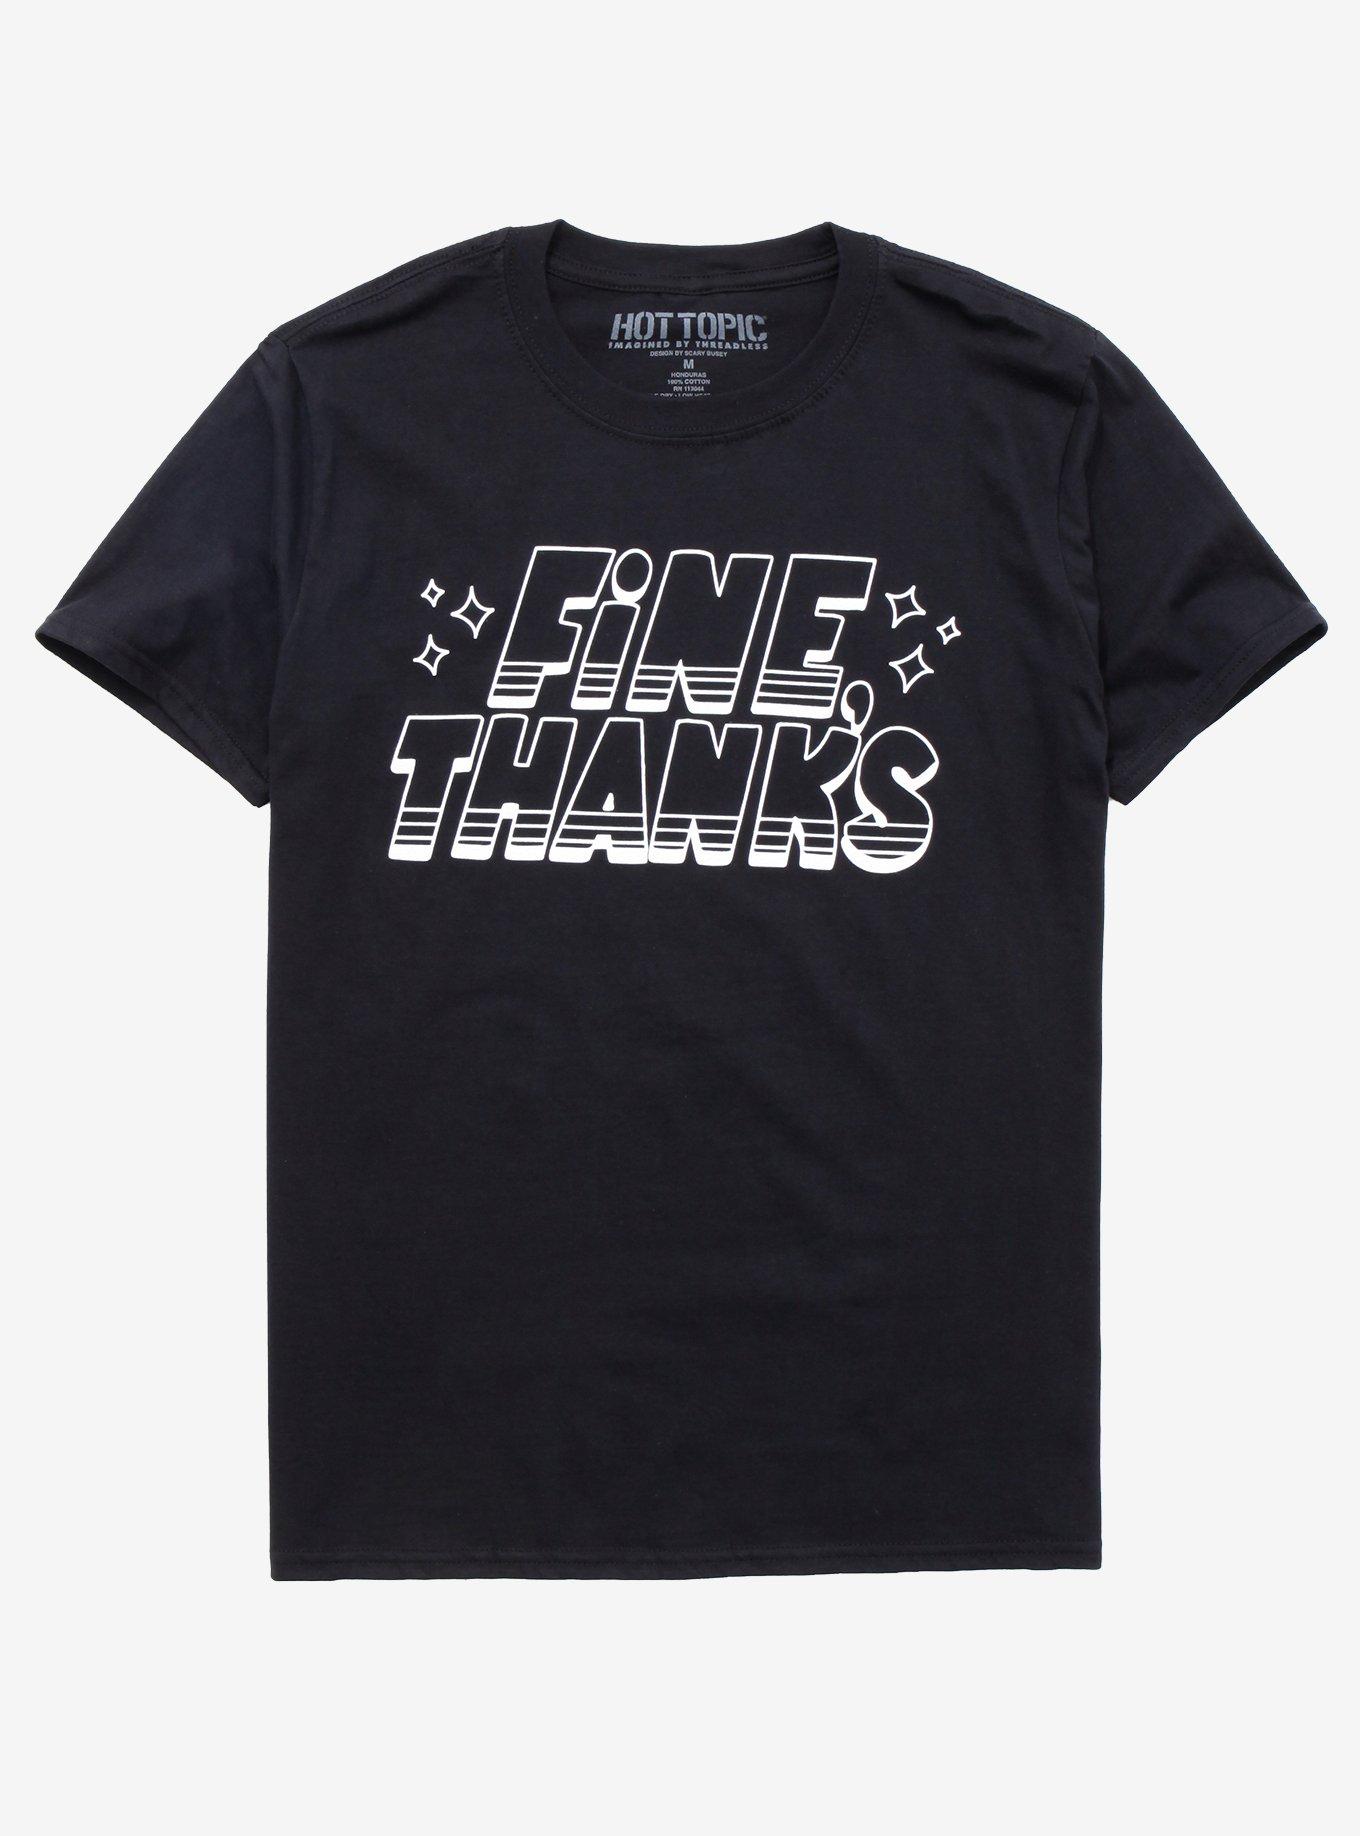 Fine Thanks T-Shirt By Scary Busey, MULTI, hi-res